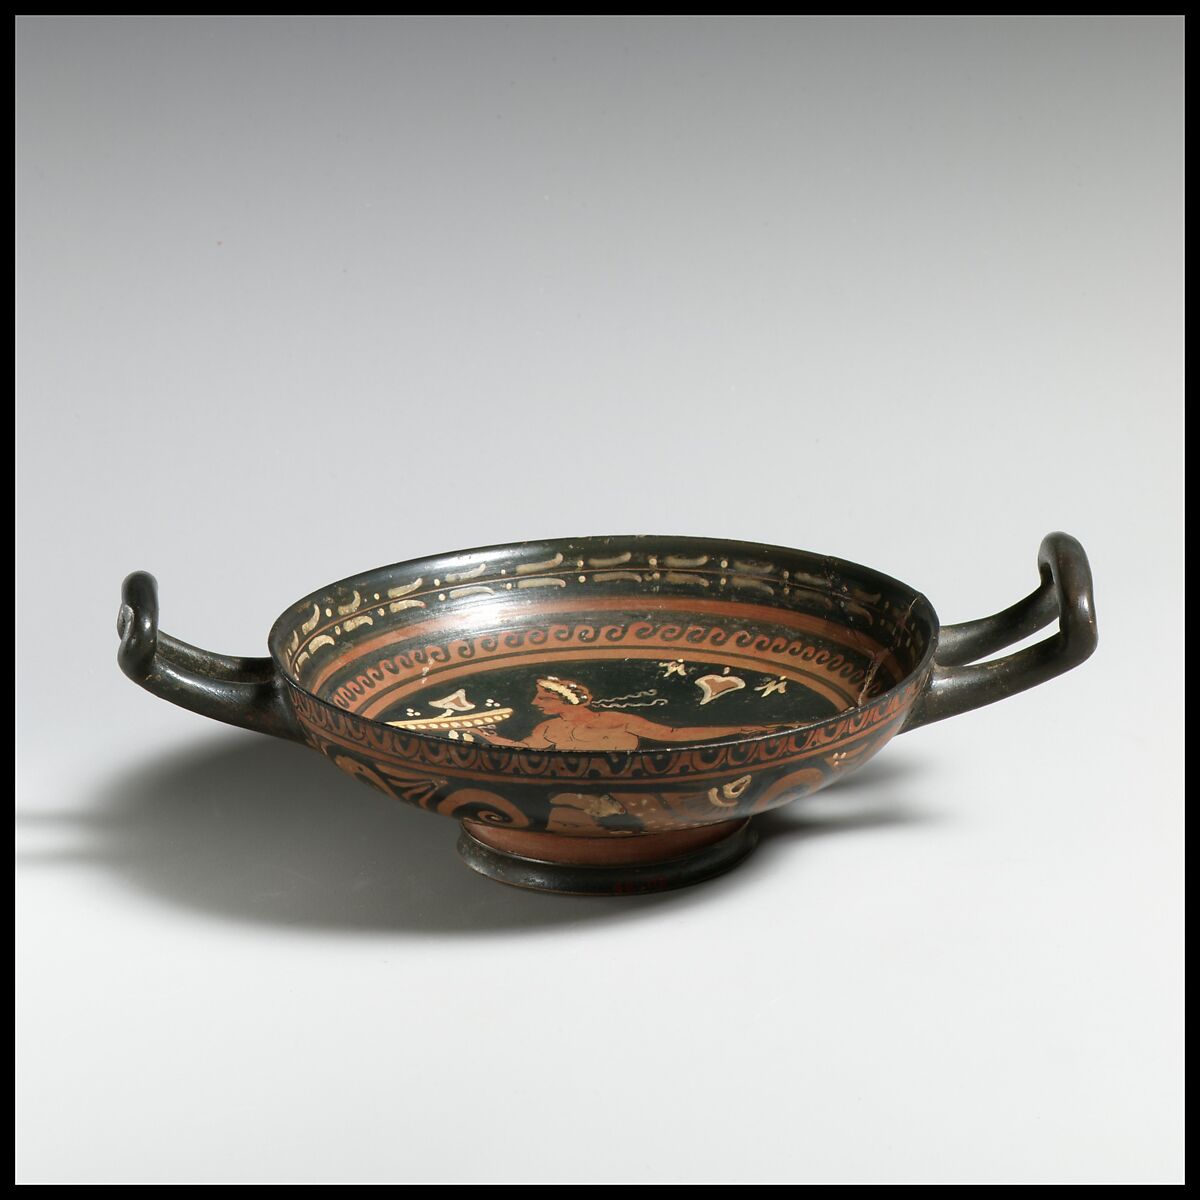 Terracotta stemless kylix (drinking cup), Close in style to the Amphorae Painter, Terracotta, Greek, South Italian, Apulian 